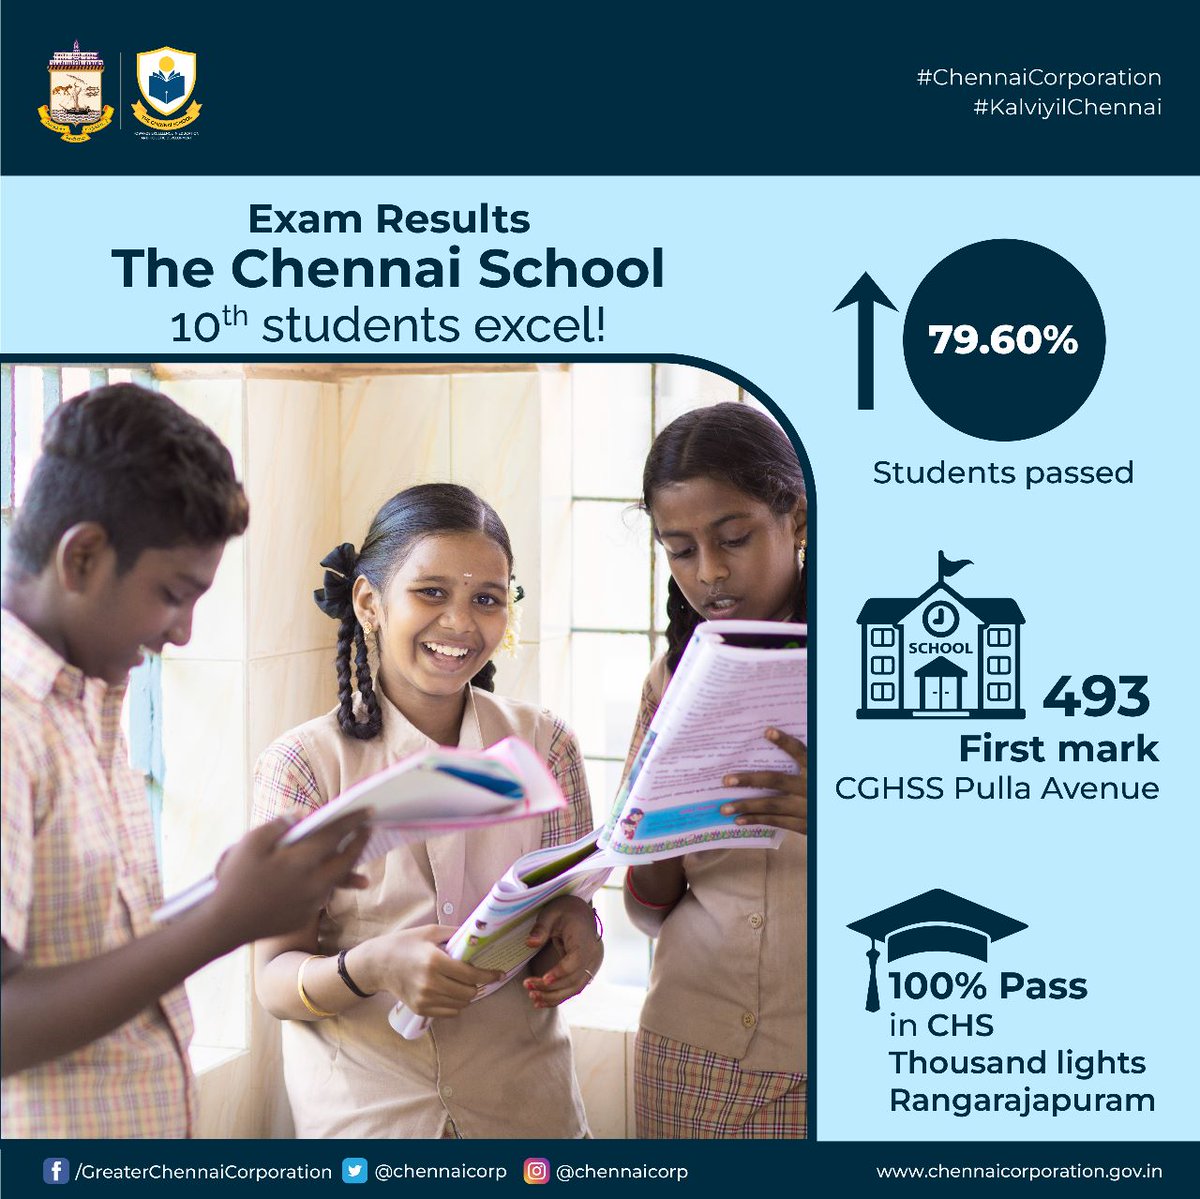 Greetings #Chennaiites!
The 10th board results are out! #TheChennaiSchool students have once again proved their aspiration for excellence.With an increase of 3.5%,this year's overall passing percentage stands at 79.6%.#GCC congratulates CGHSS Pulla Avenue for the first-rank feat!